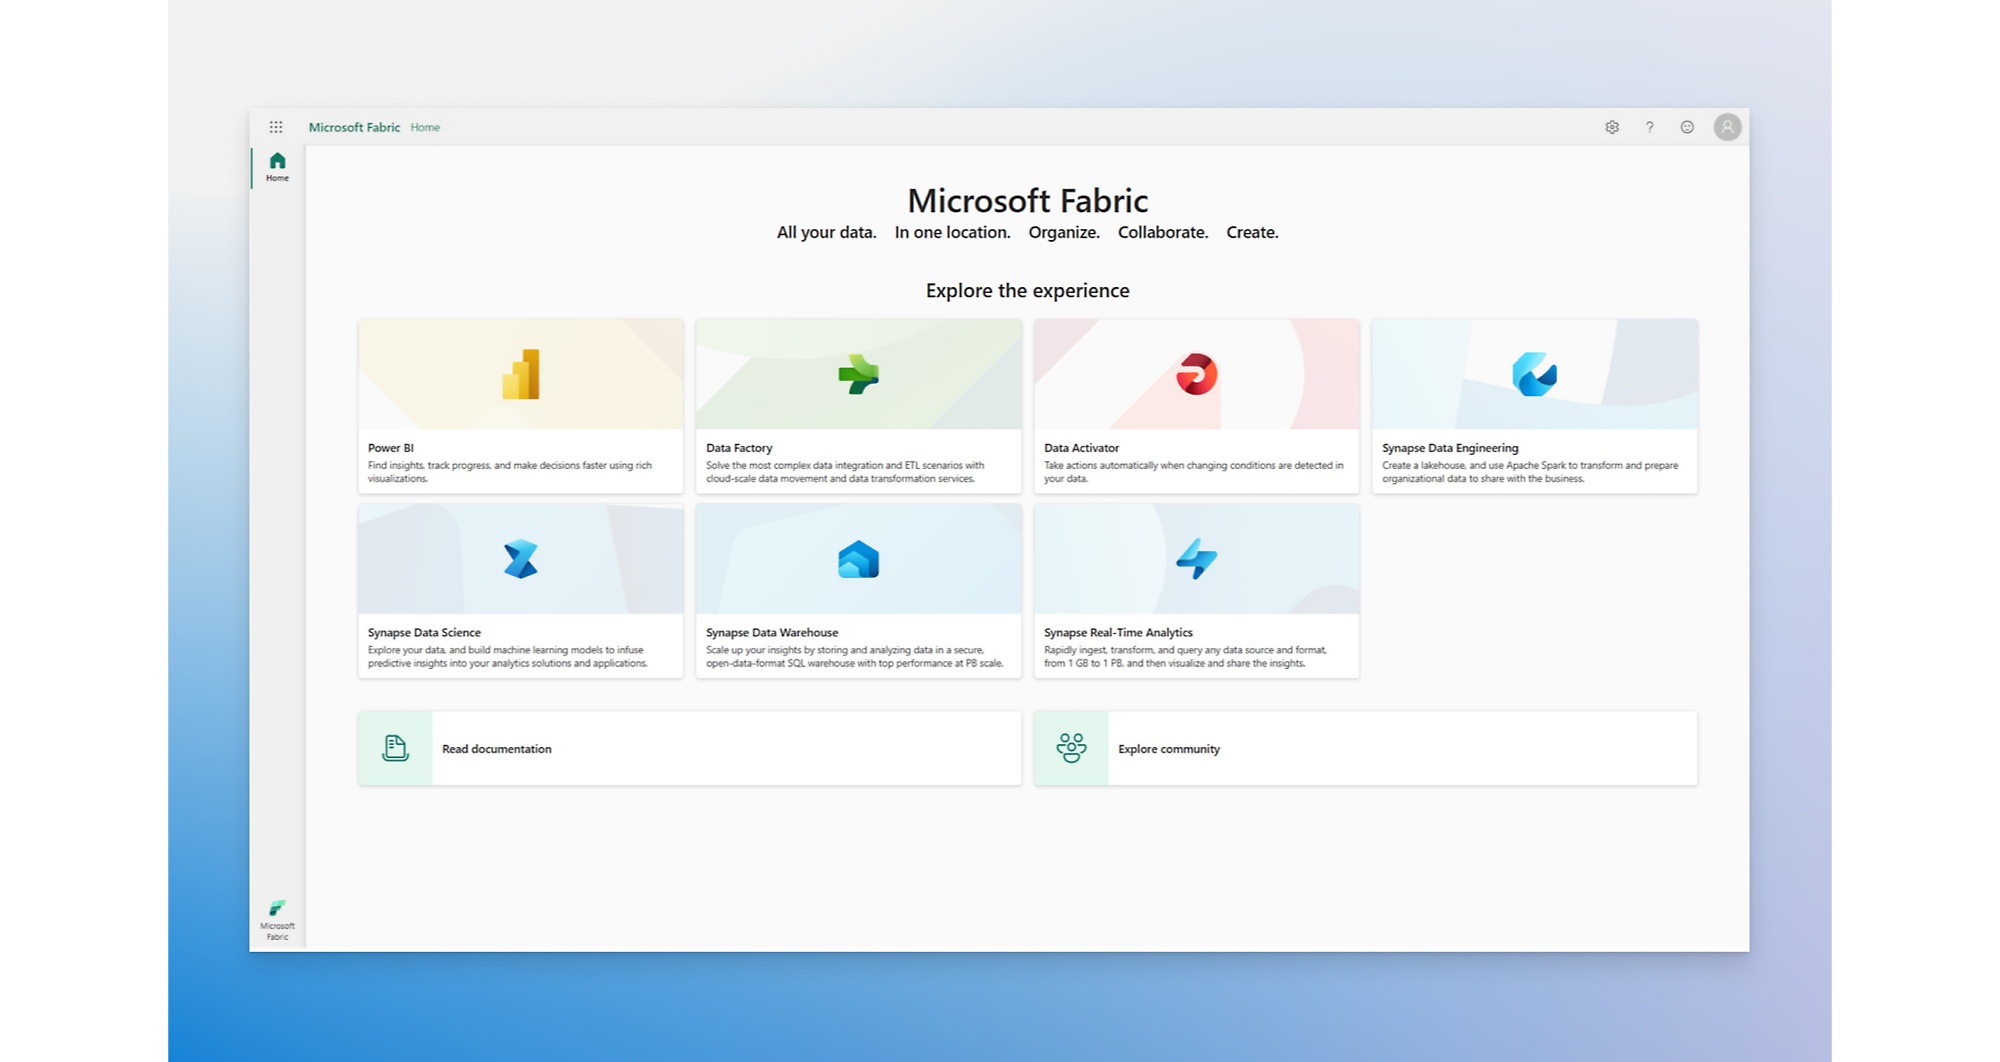 Microsoft Fabric landing page showing various options